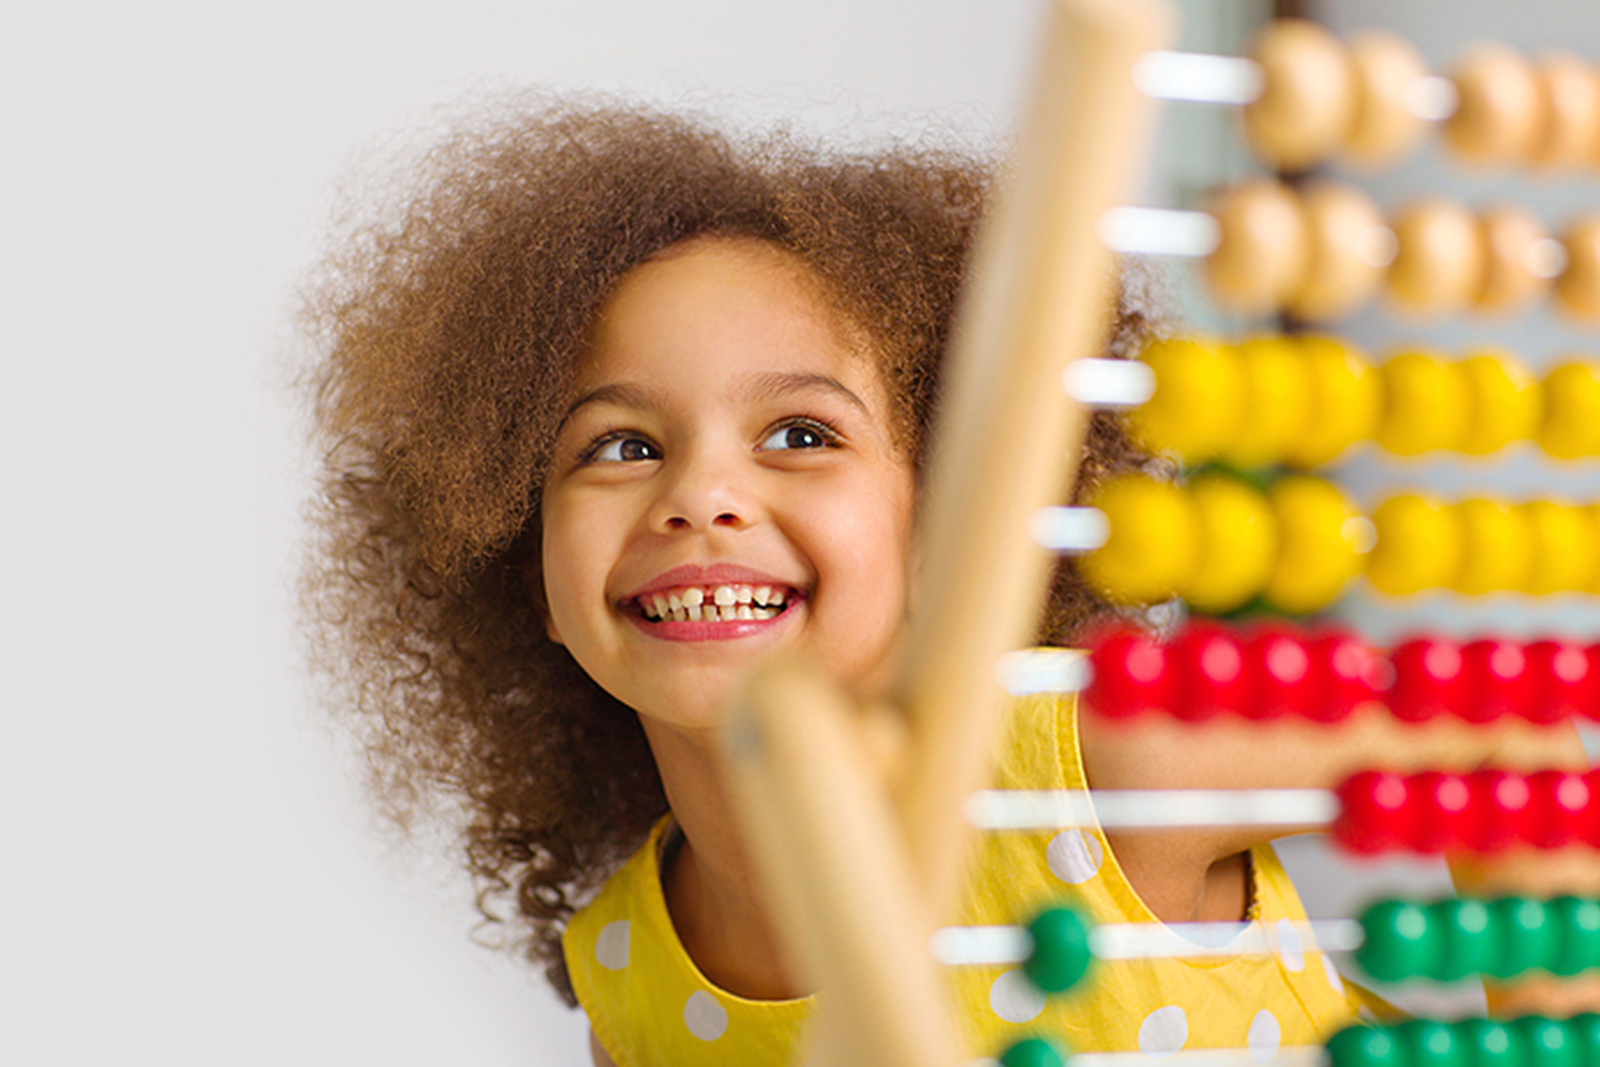 how-can-a-child-develop-mathematical-skills-through-play-tactic-games